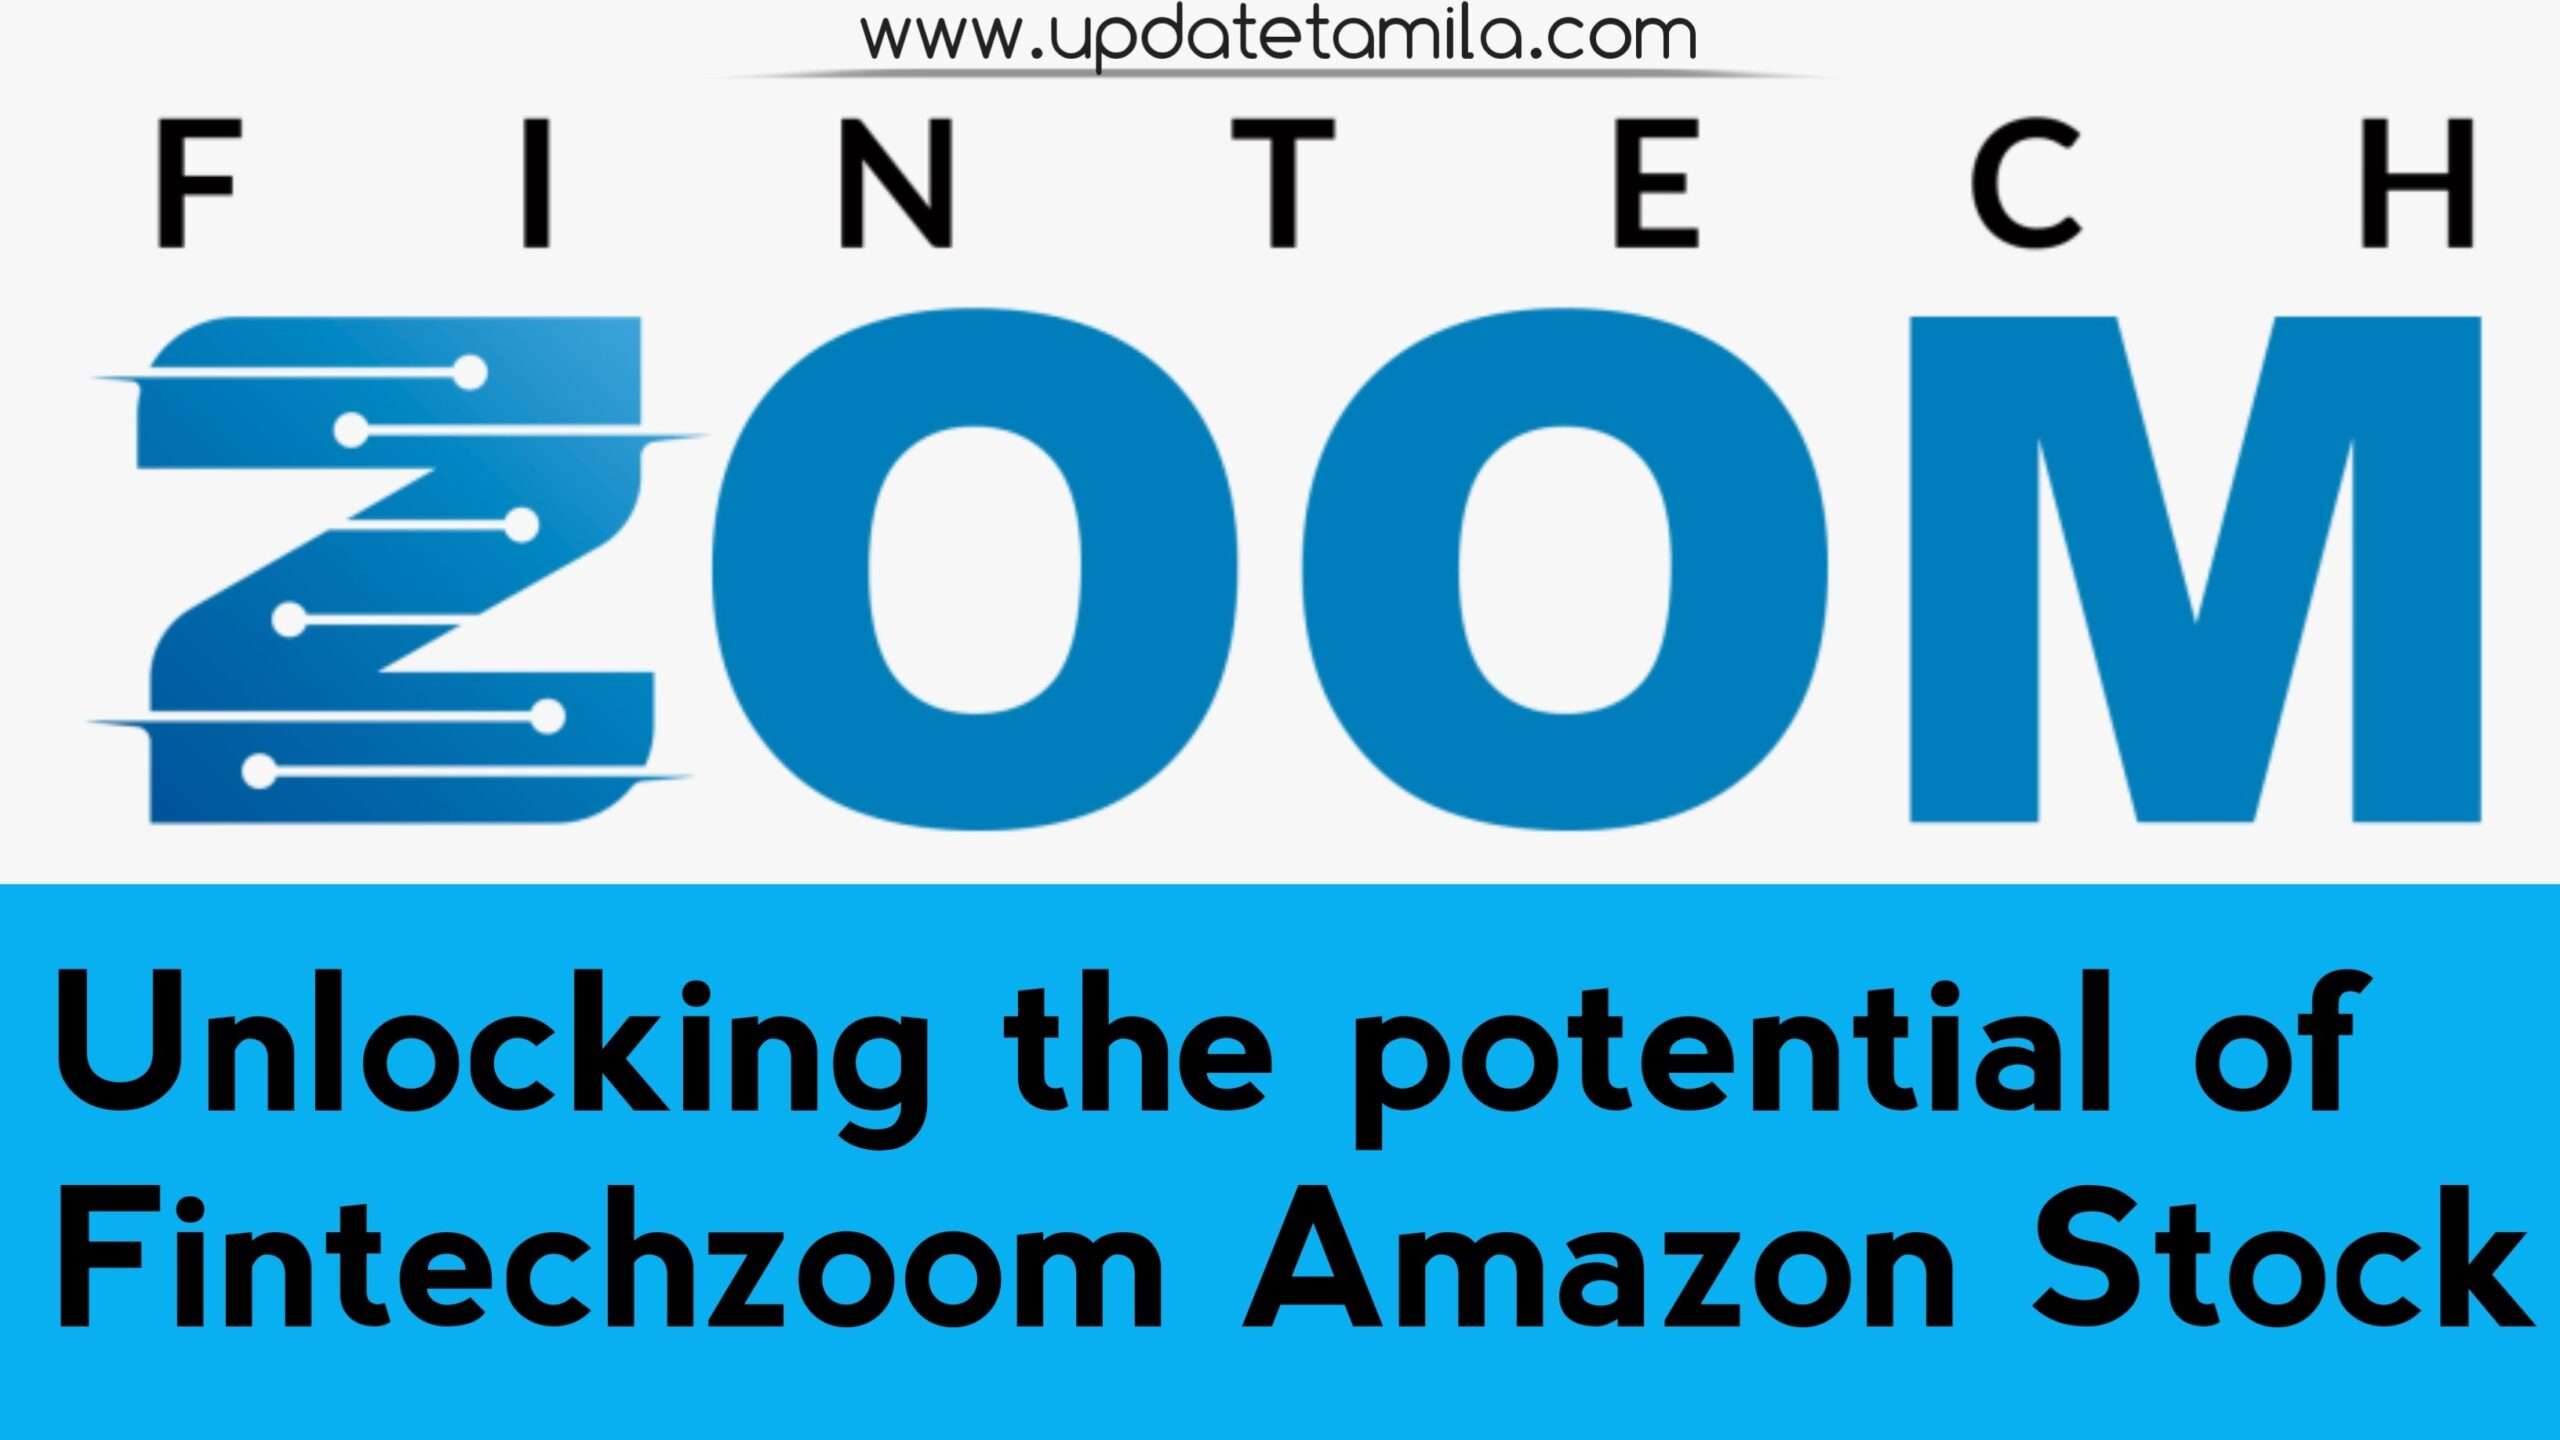 Unlocking the Potential of FintechZoom Amazon Stock : The Ultimate Guide to Investing in FintechZoom Amazon Stock